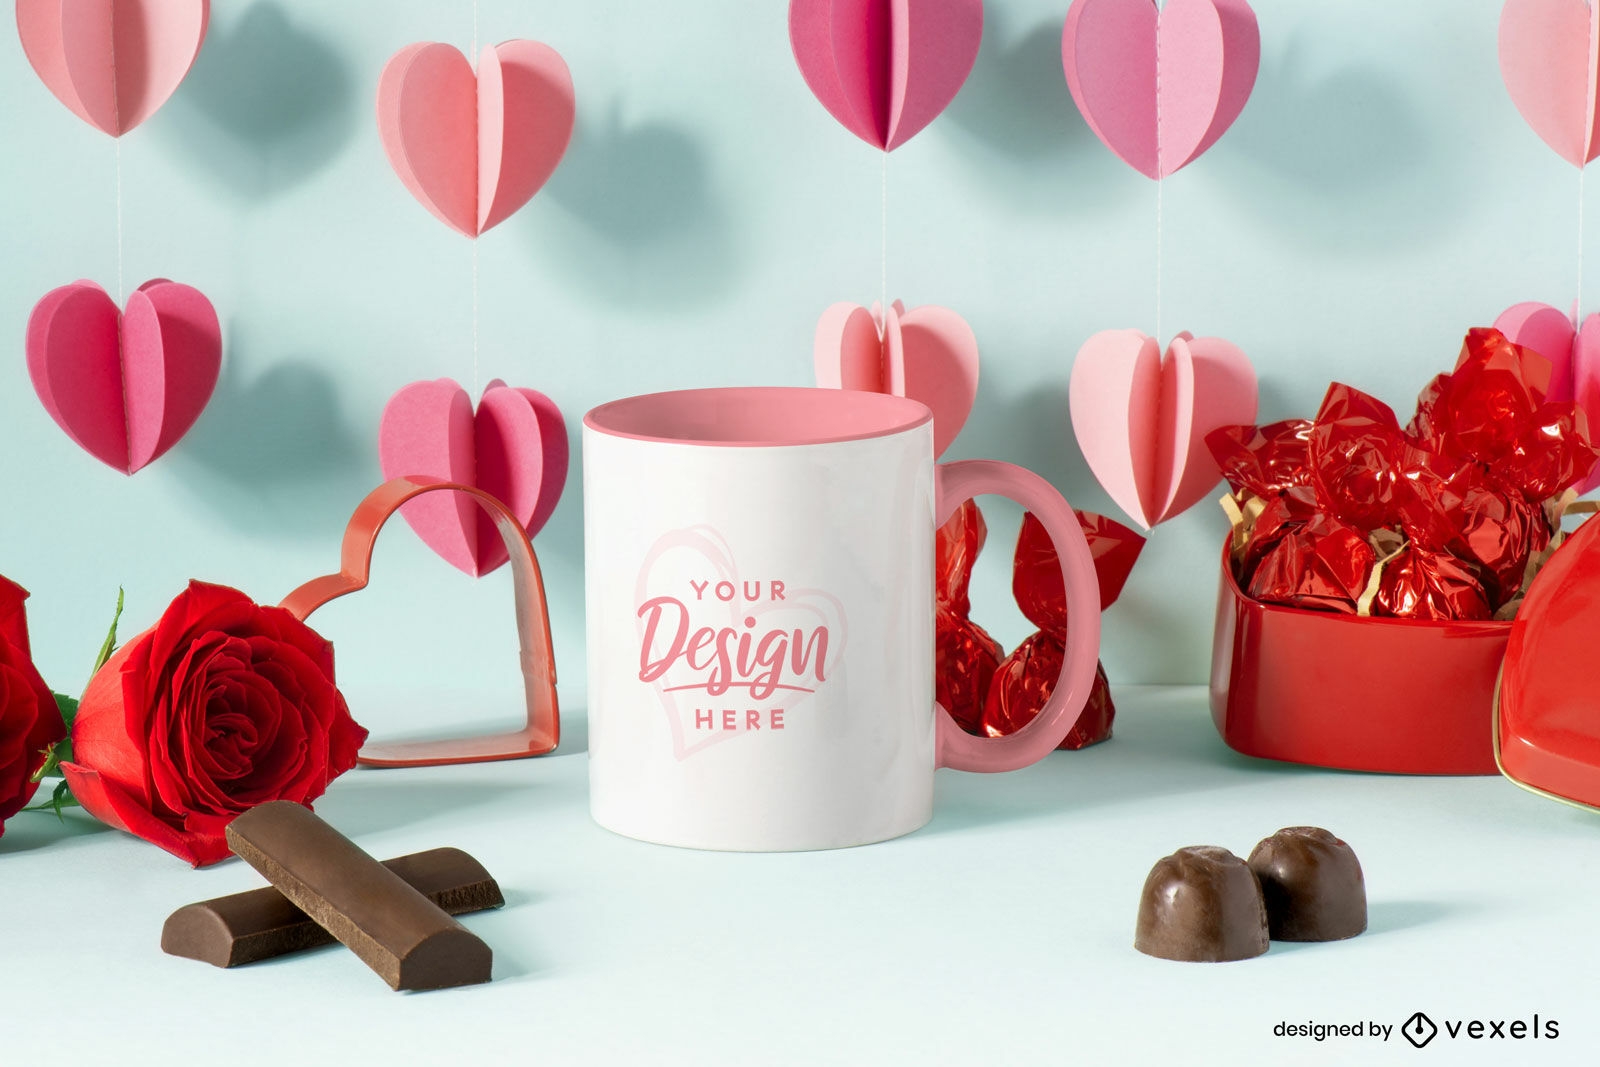 Valentines Day Tumbler With Chocolate Is My Valentine Design